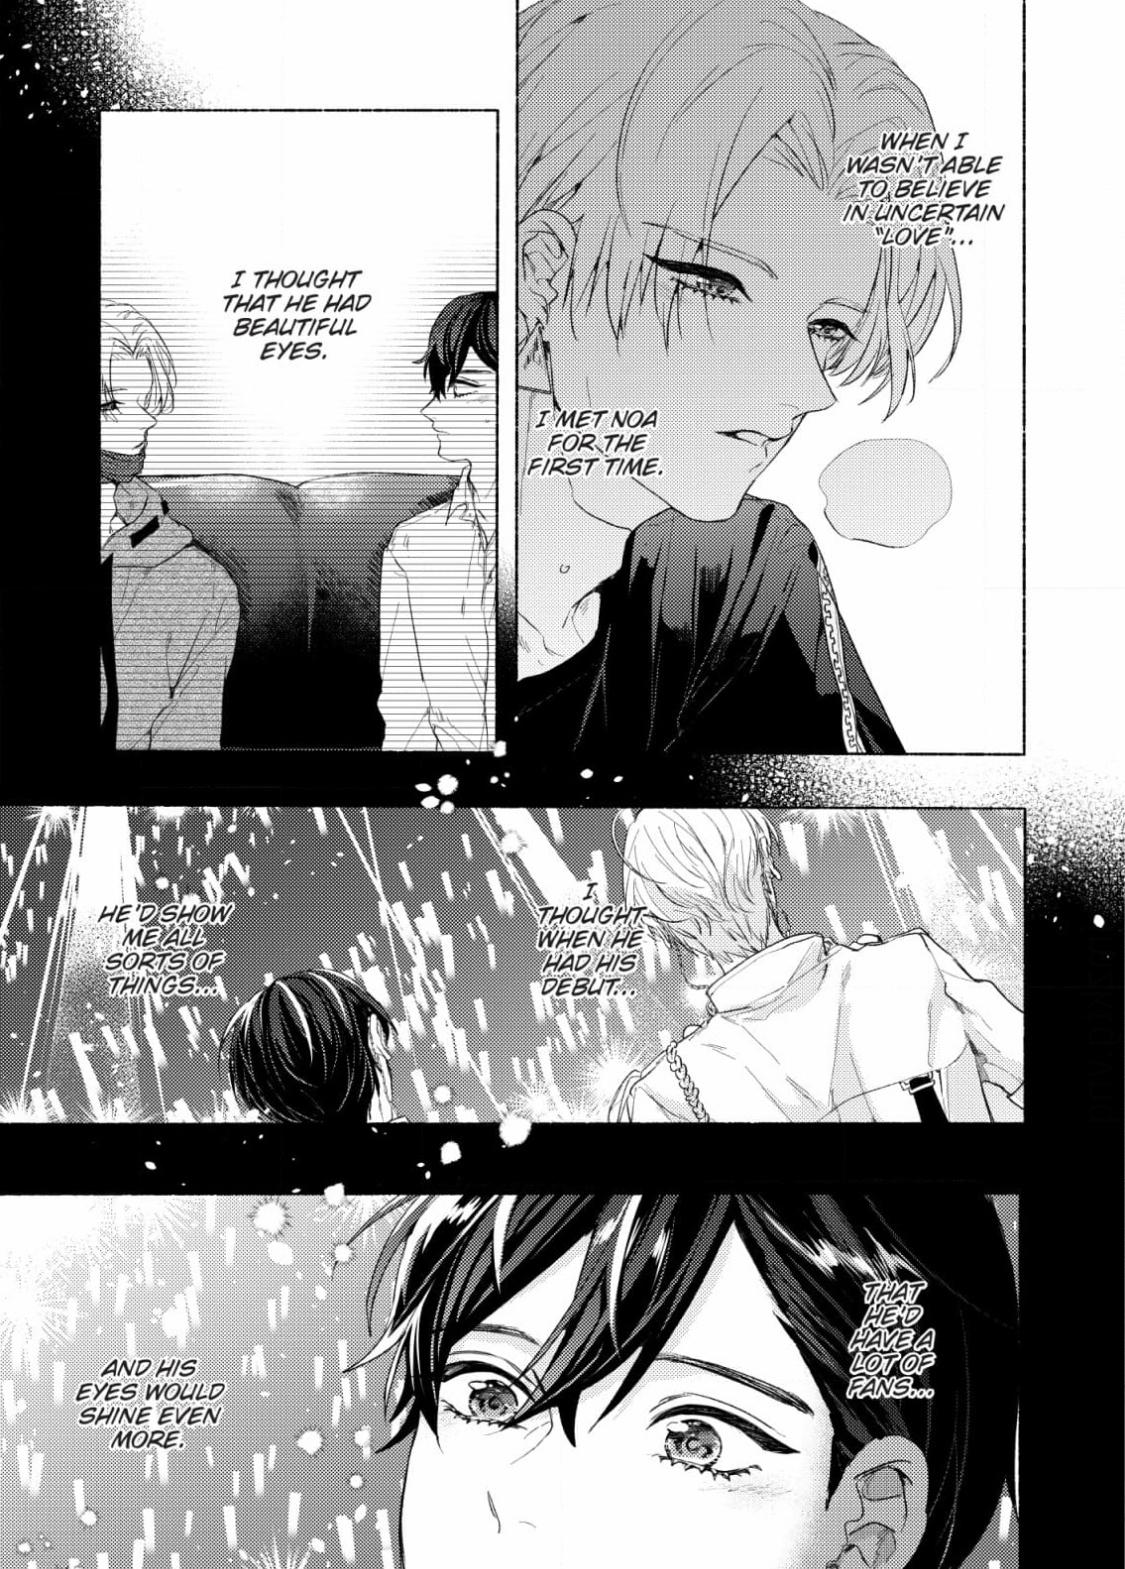 Kiss Me Crying Ch.8 Page 18 - Mangago